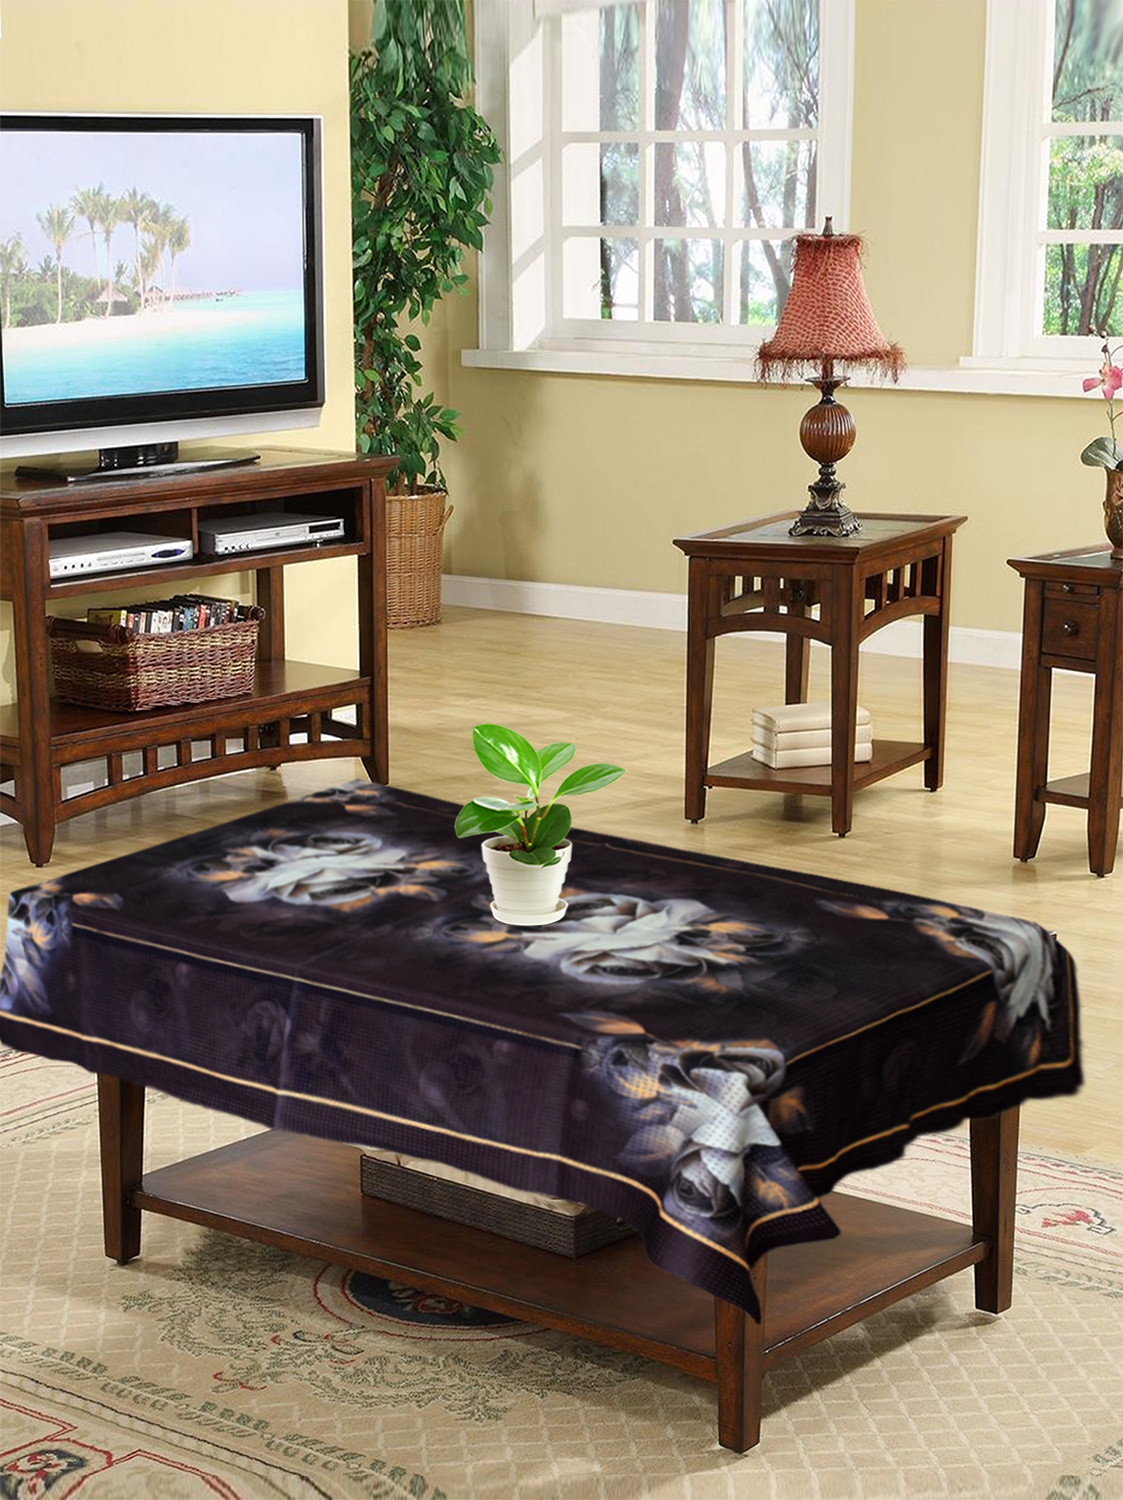 Kuber Industries Rose Printed Cotton 4 Seater Center Table Cover- 40